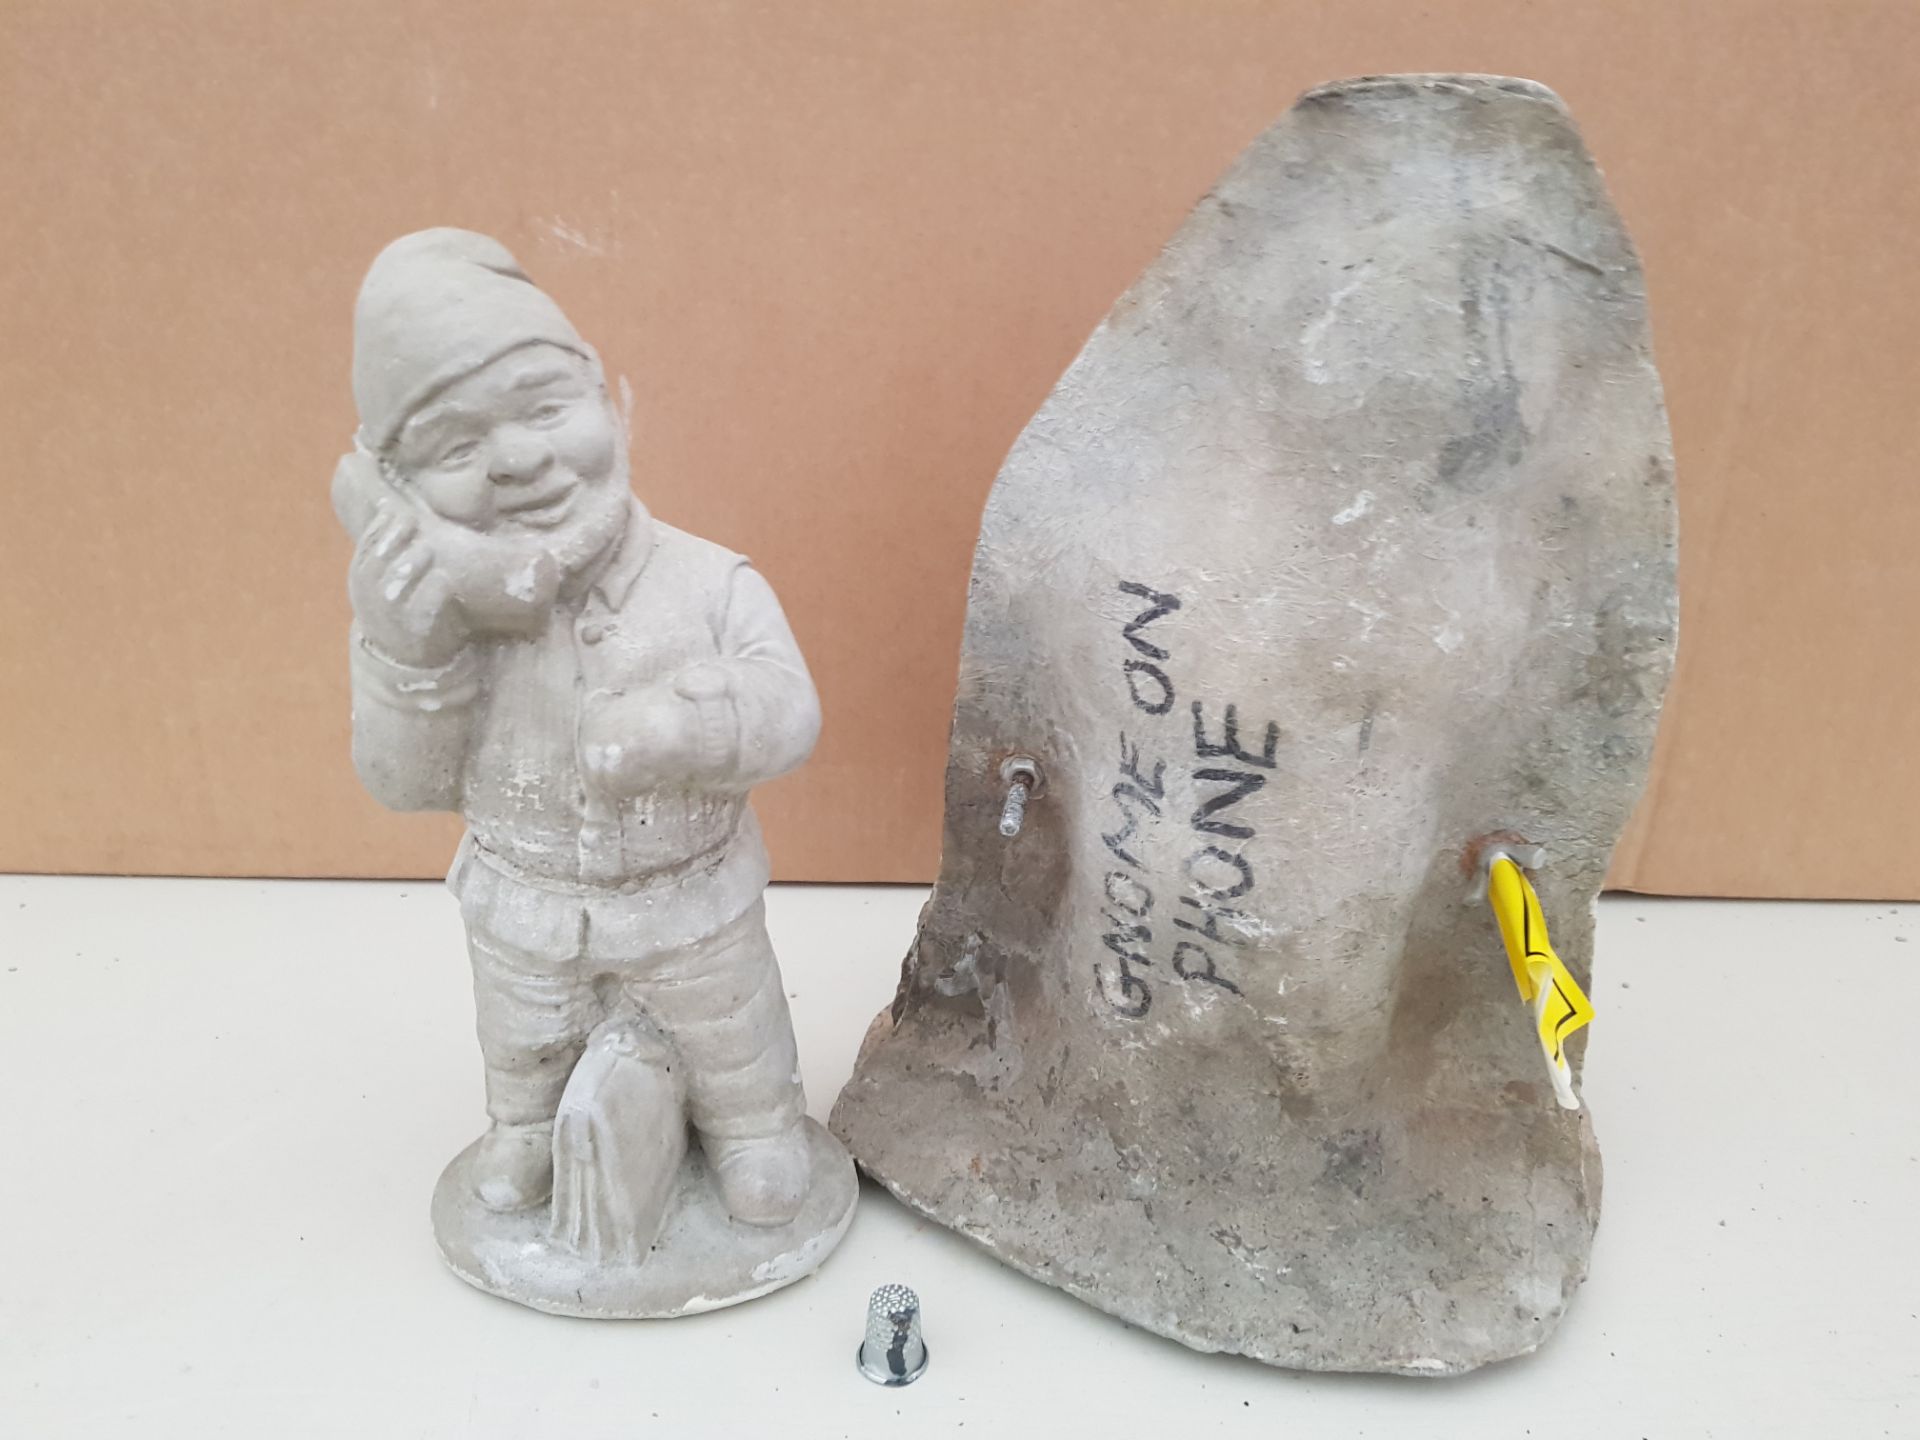 26CM GARDEN GNOME ON A PHONE MASTER CAST WITH LATEX SLIP & FIBRE GLASS MOULD (FOR CASTING PRODUCT TO